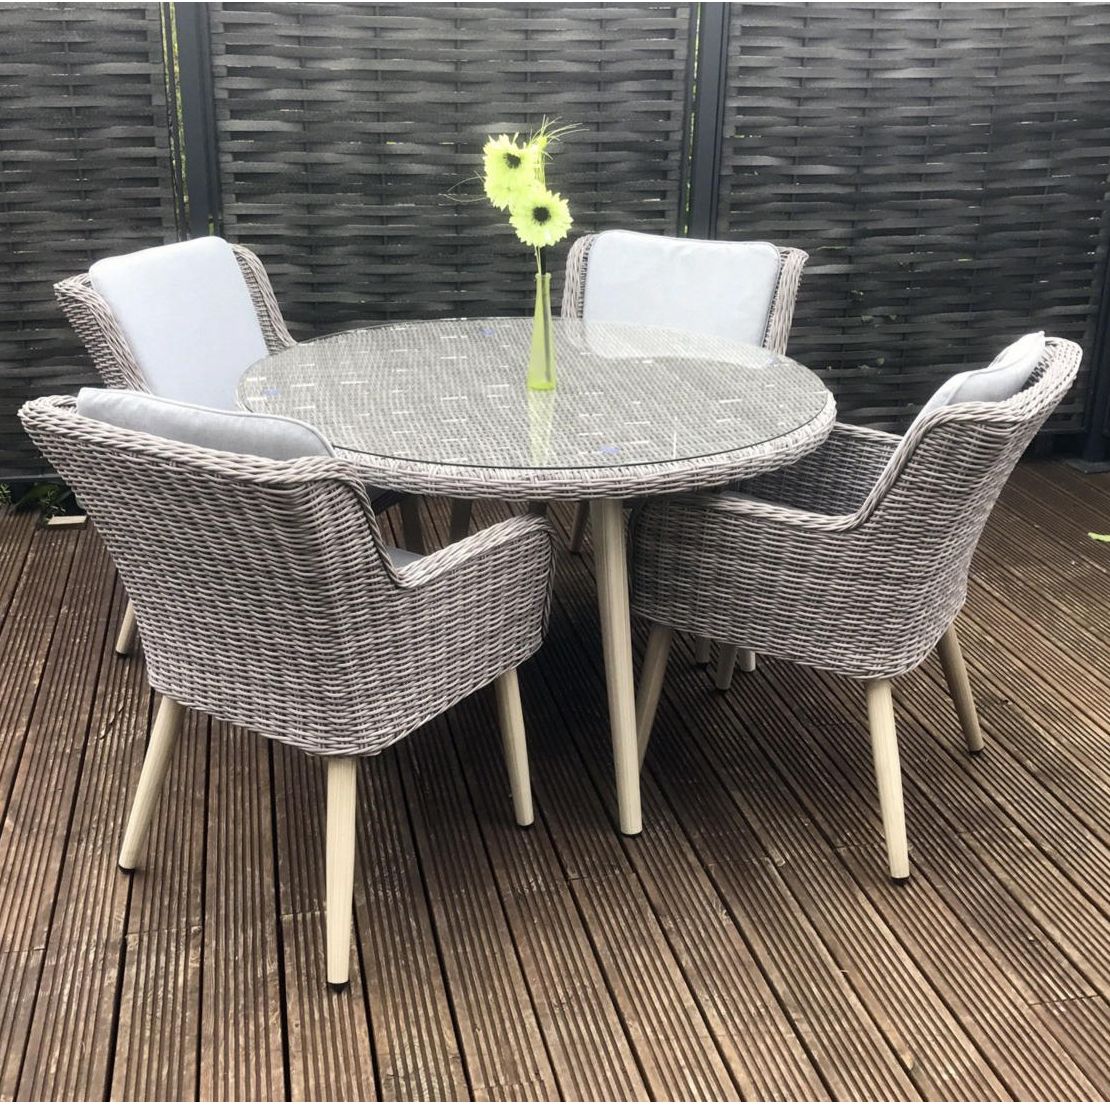 Image of Signature Weave Garden Furniture Danielle Grey Round 120cm Dining Table with 4 Chairs